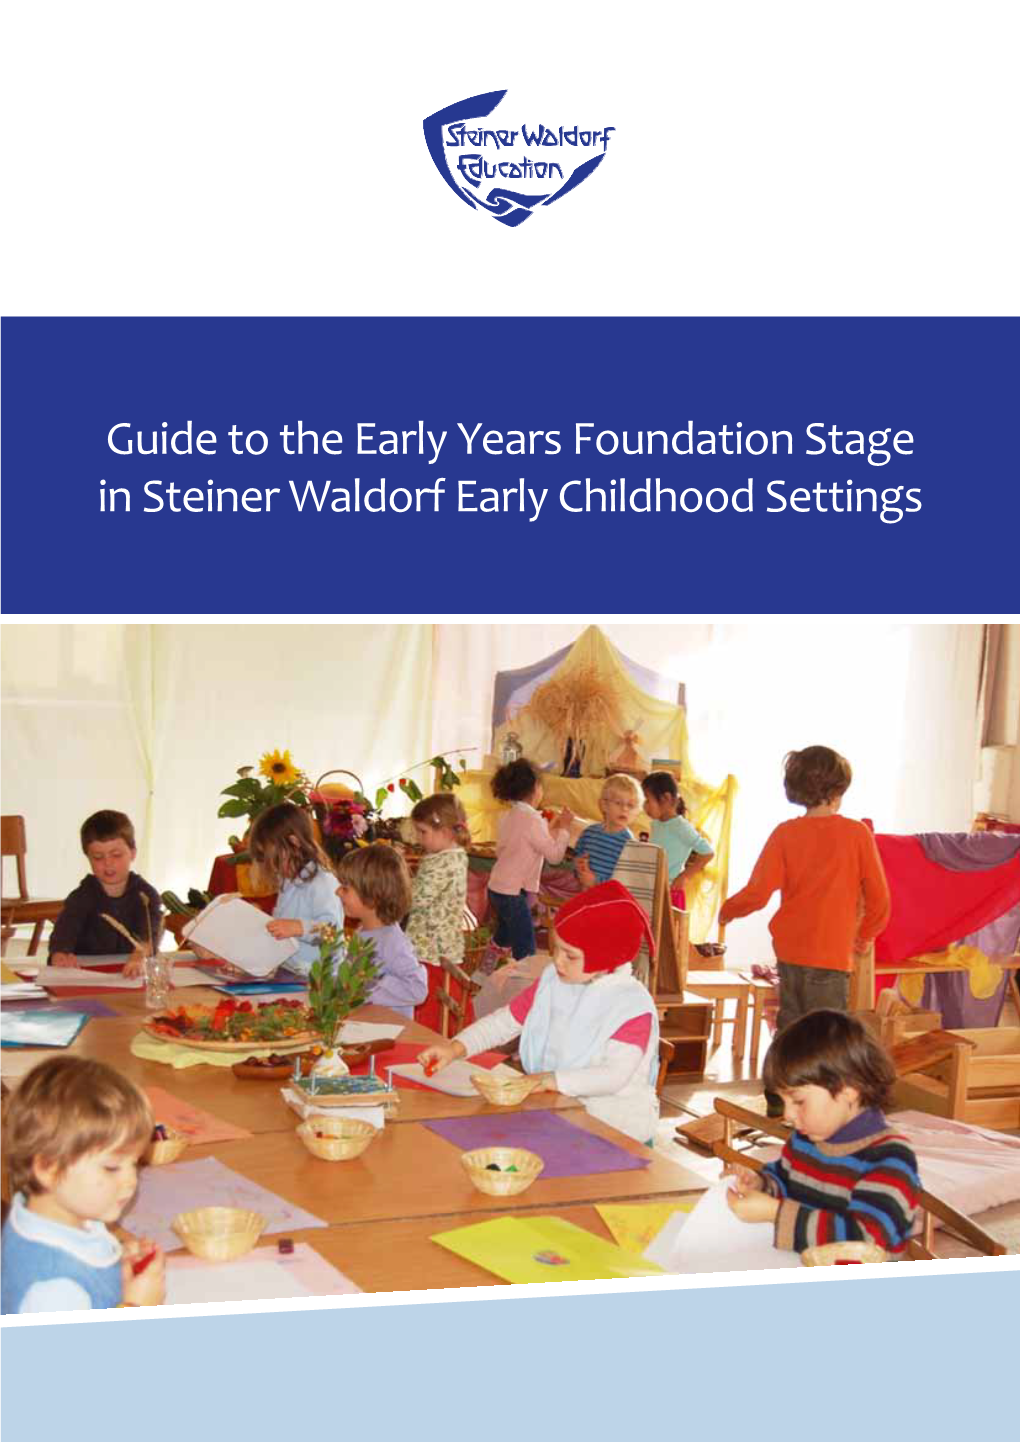 Guide to the Early Years Foundation Stage in Steiner Waldorf Early Childhood Settings